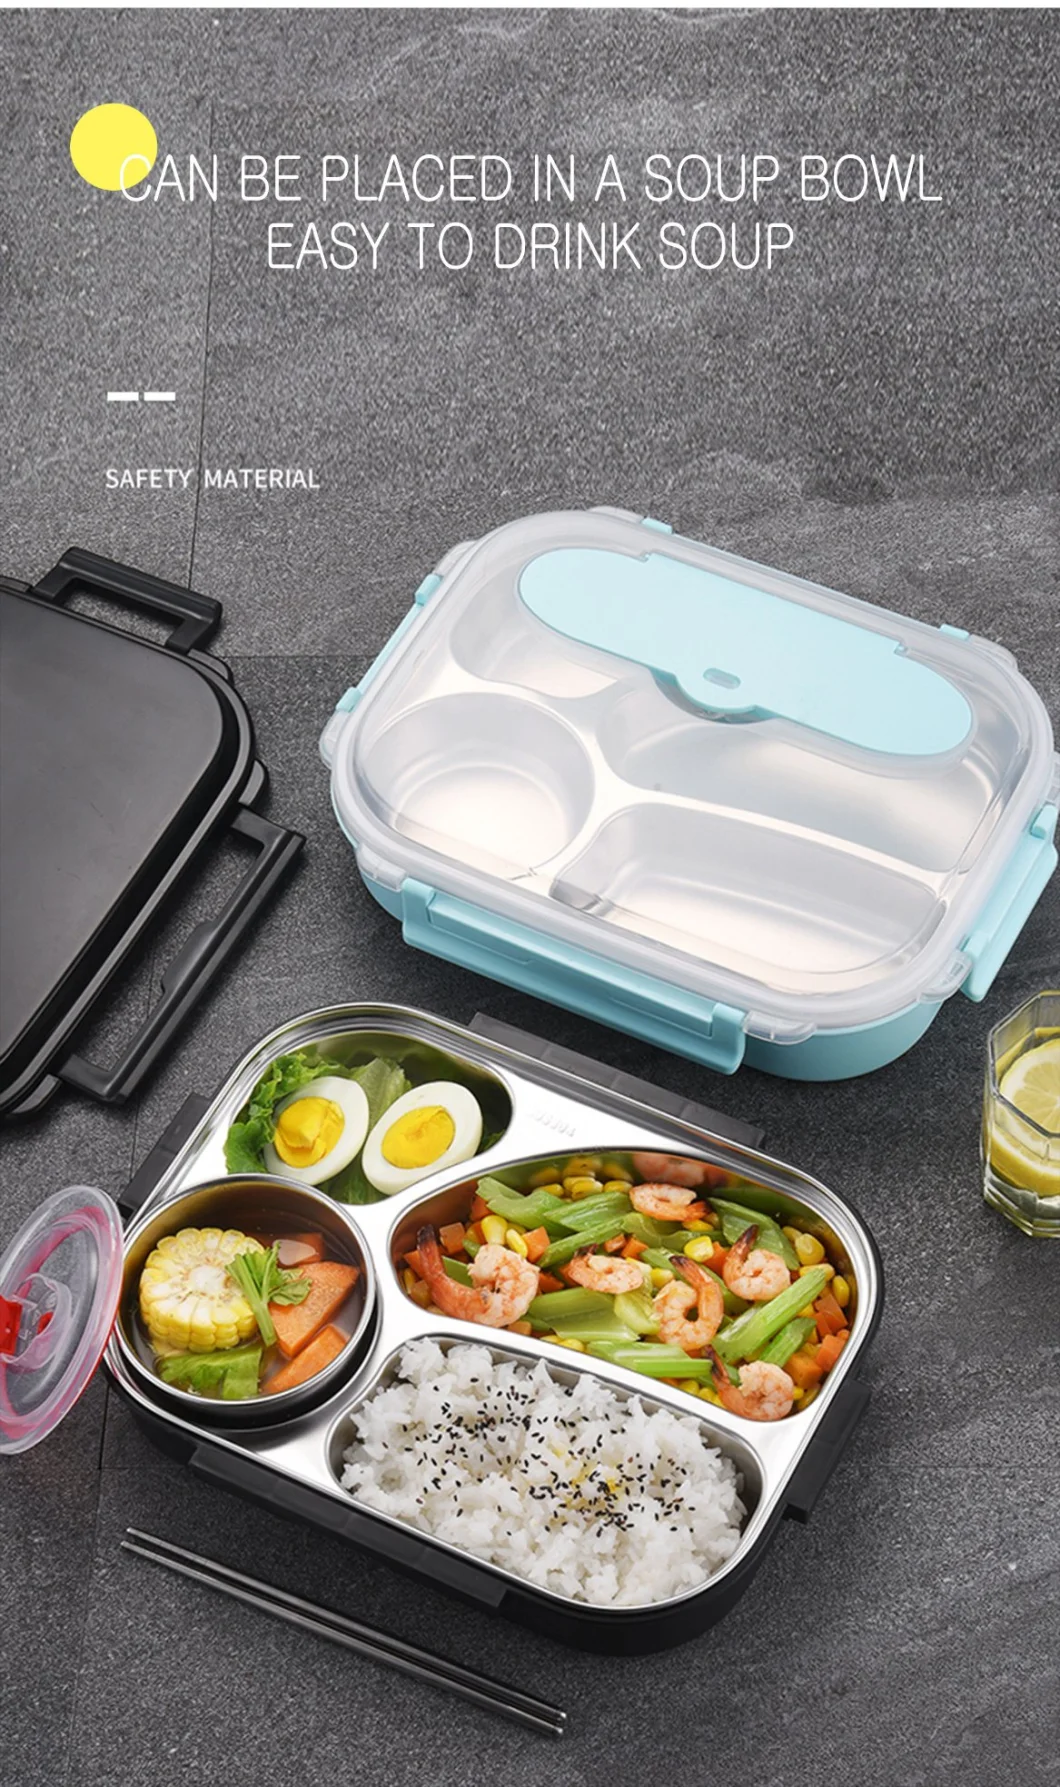 Plastic Reusable Eco Friendly Leakproof 1.6L 3/4 Compartment 304 Stainless Steel Retain Freshness Lunch Bento Box for School/Office/Outdoor/Camping/Hospital